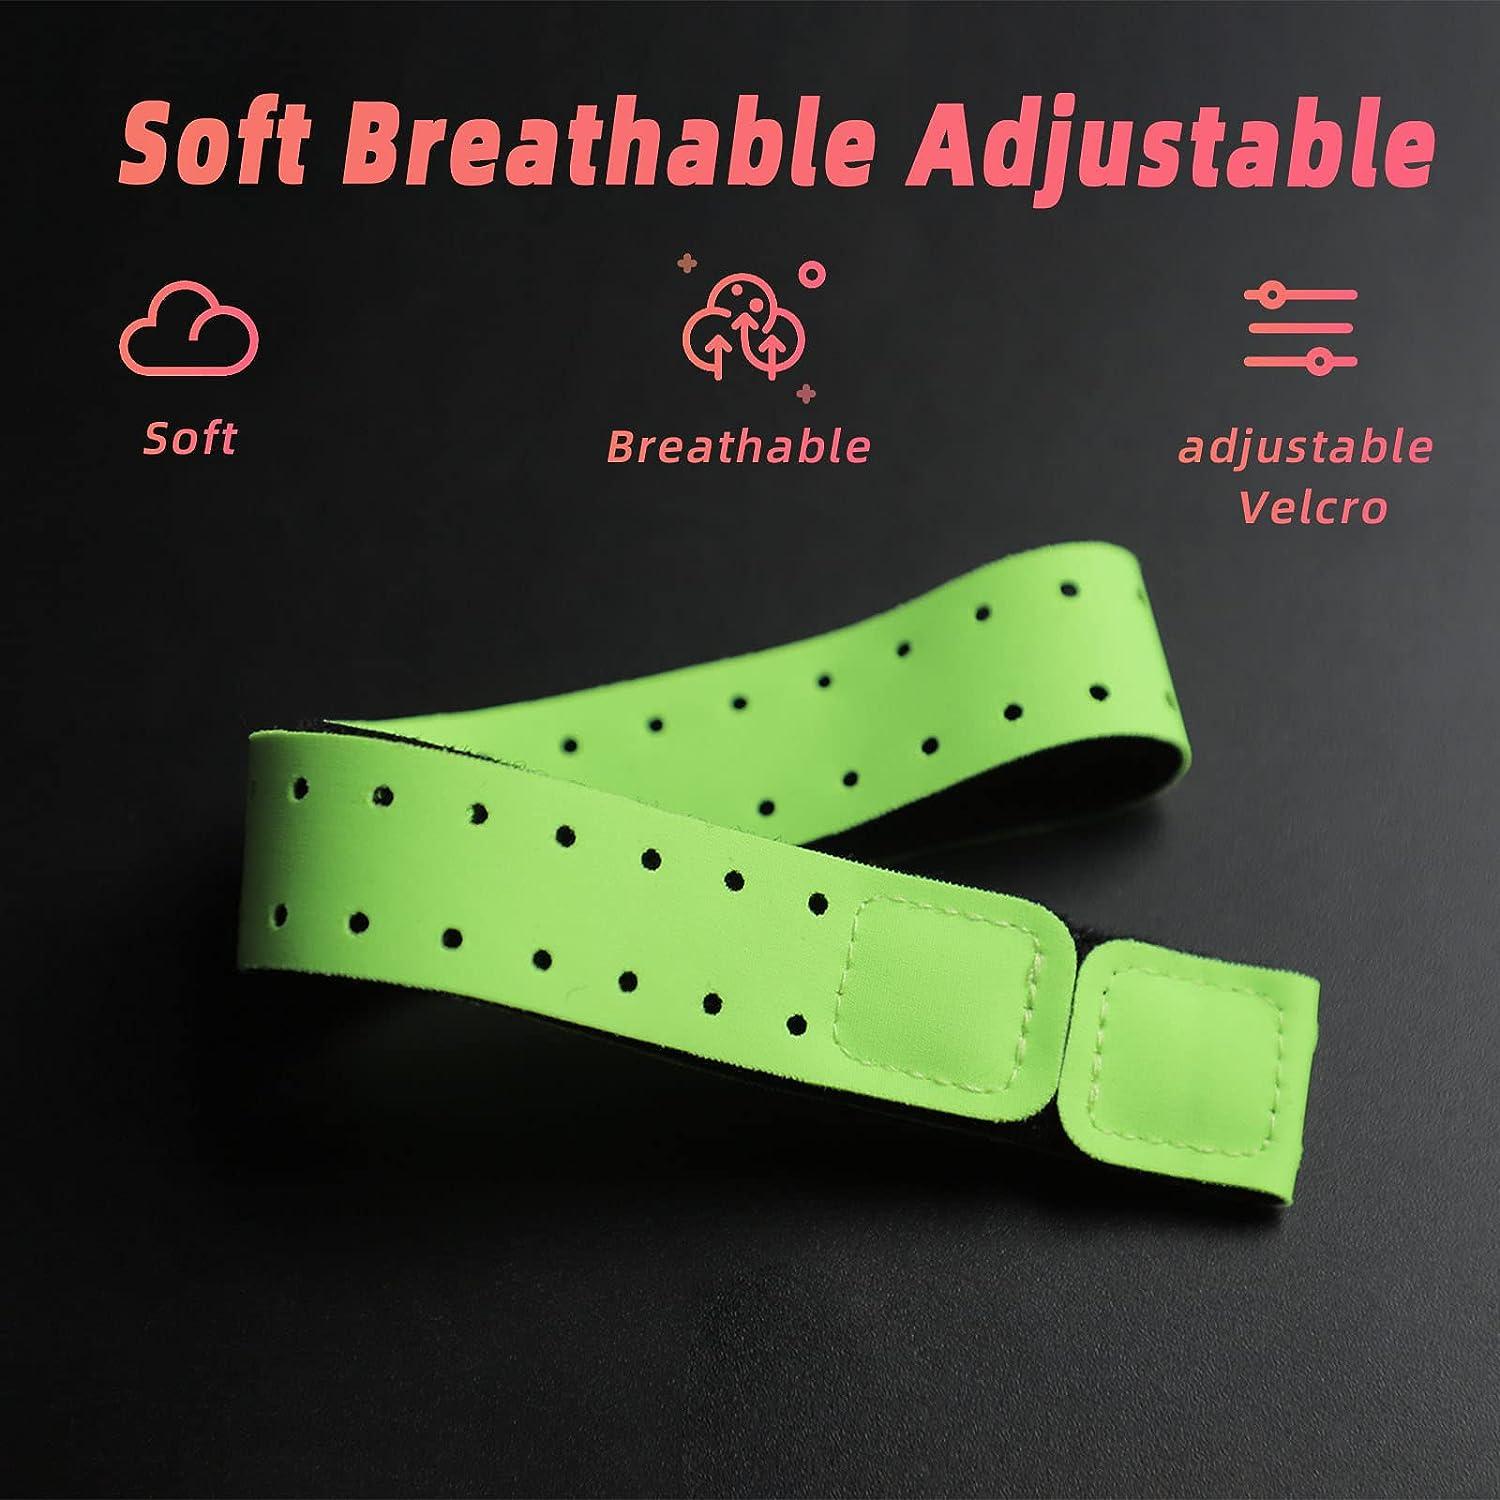 Replacement Heart Rate Monitor Armband Straps 20mm Soft Strap